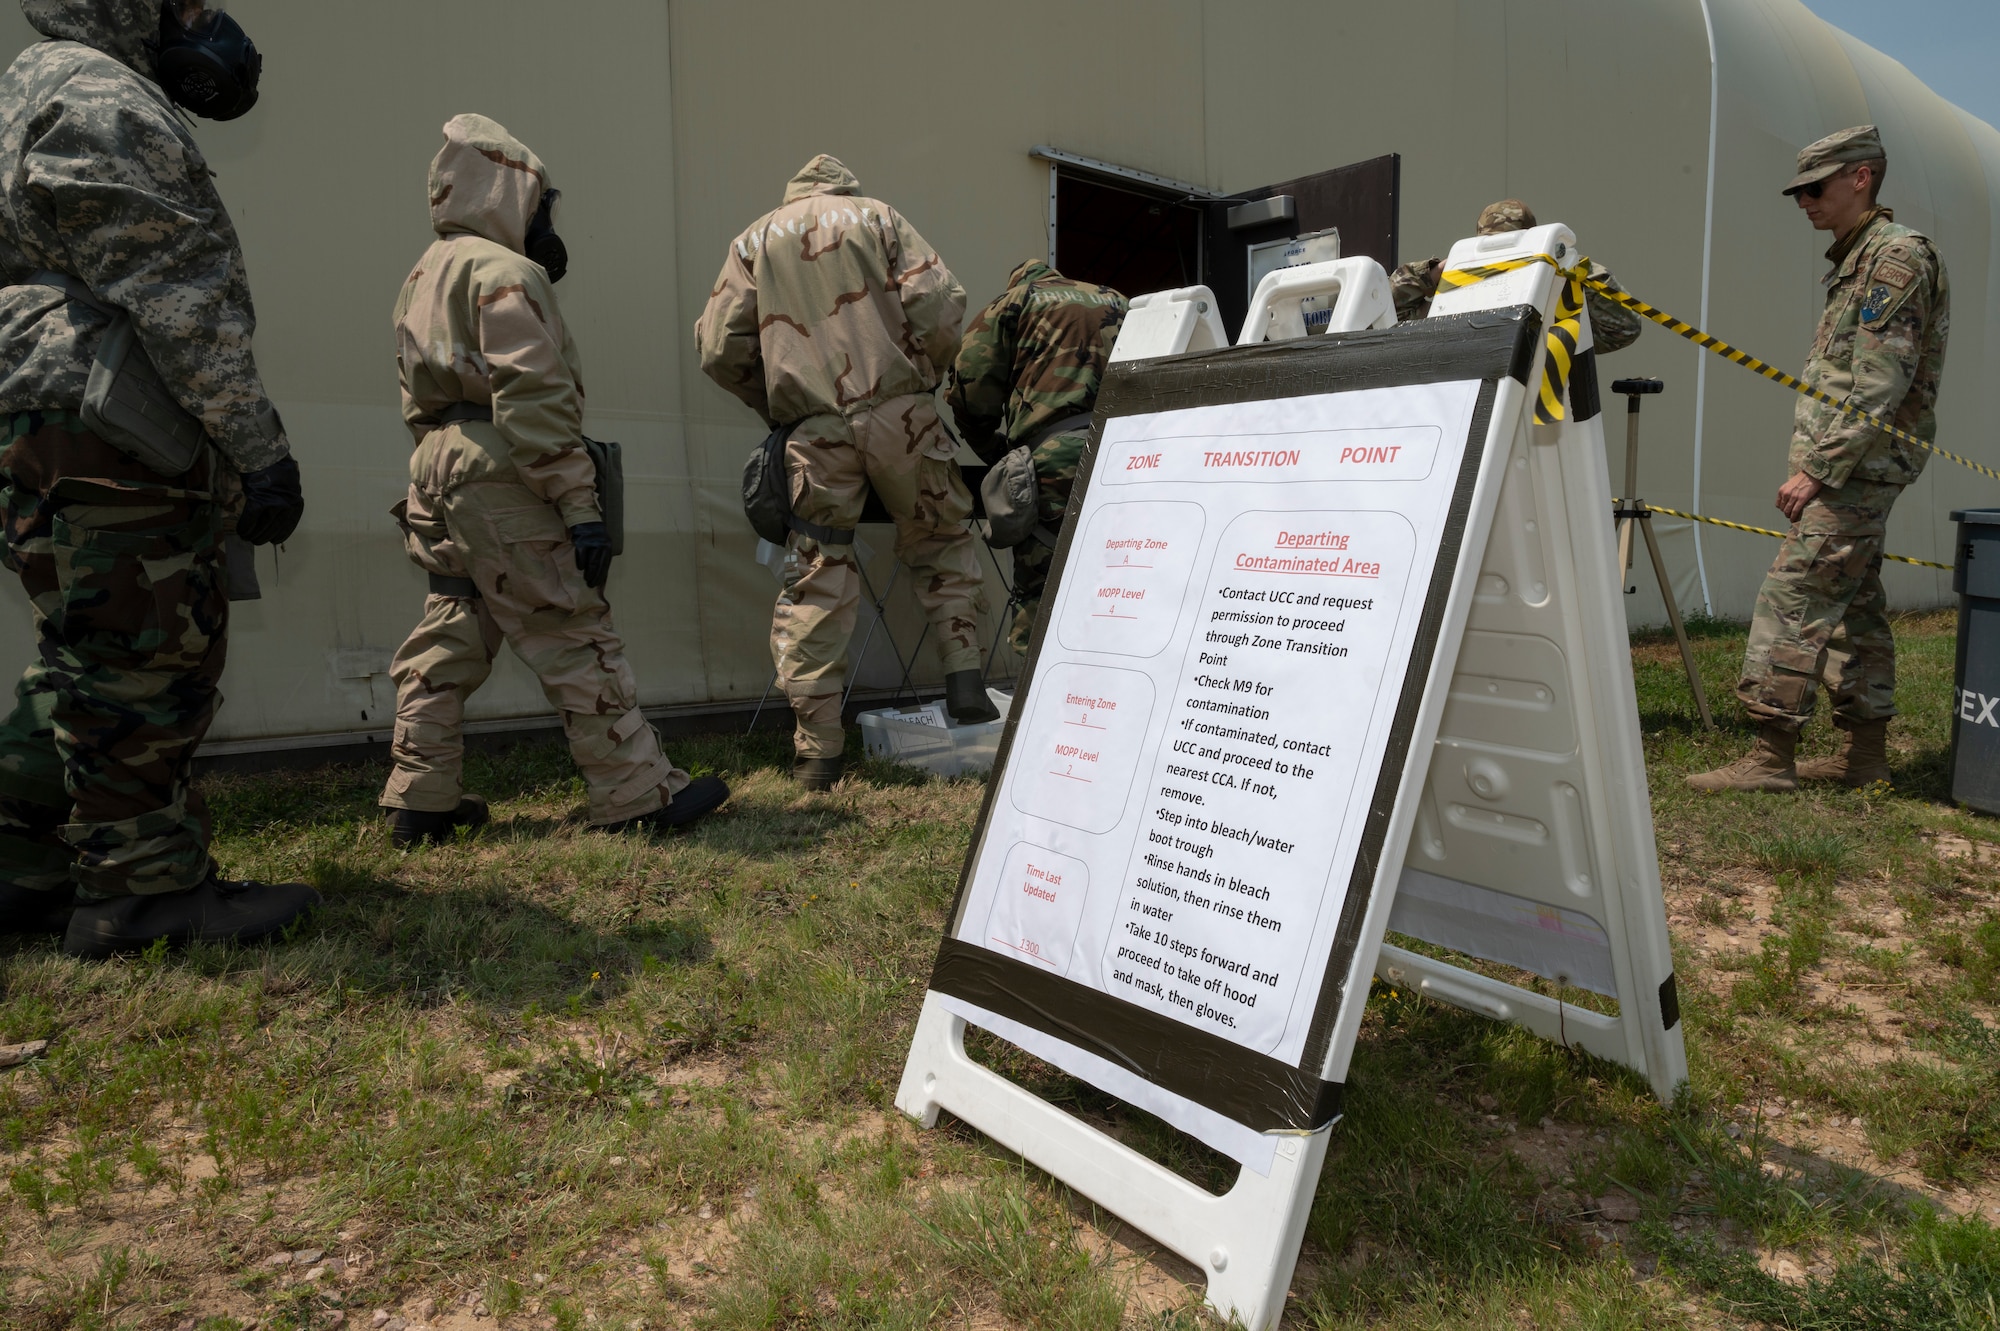 People in chemical gear line up outside a building near a sign with instructions written on it.